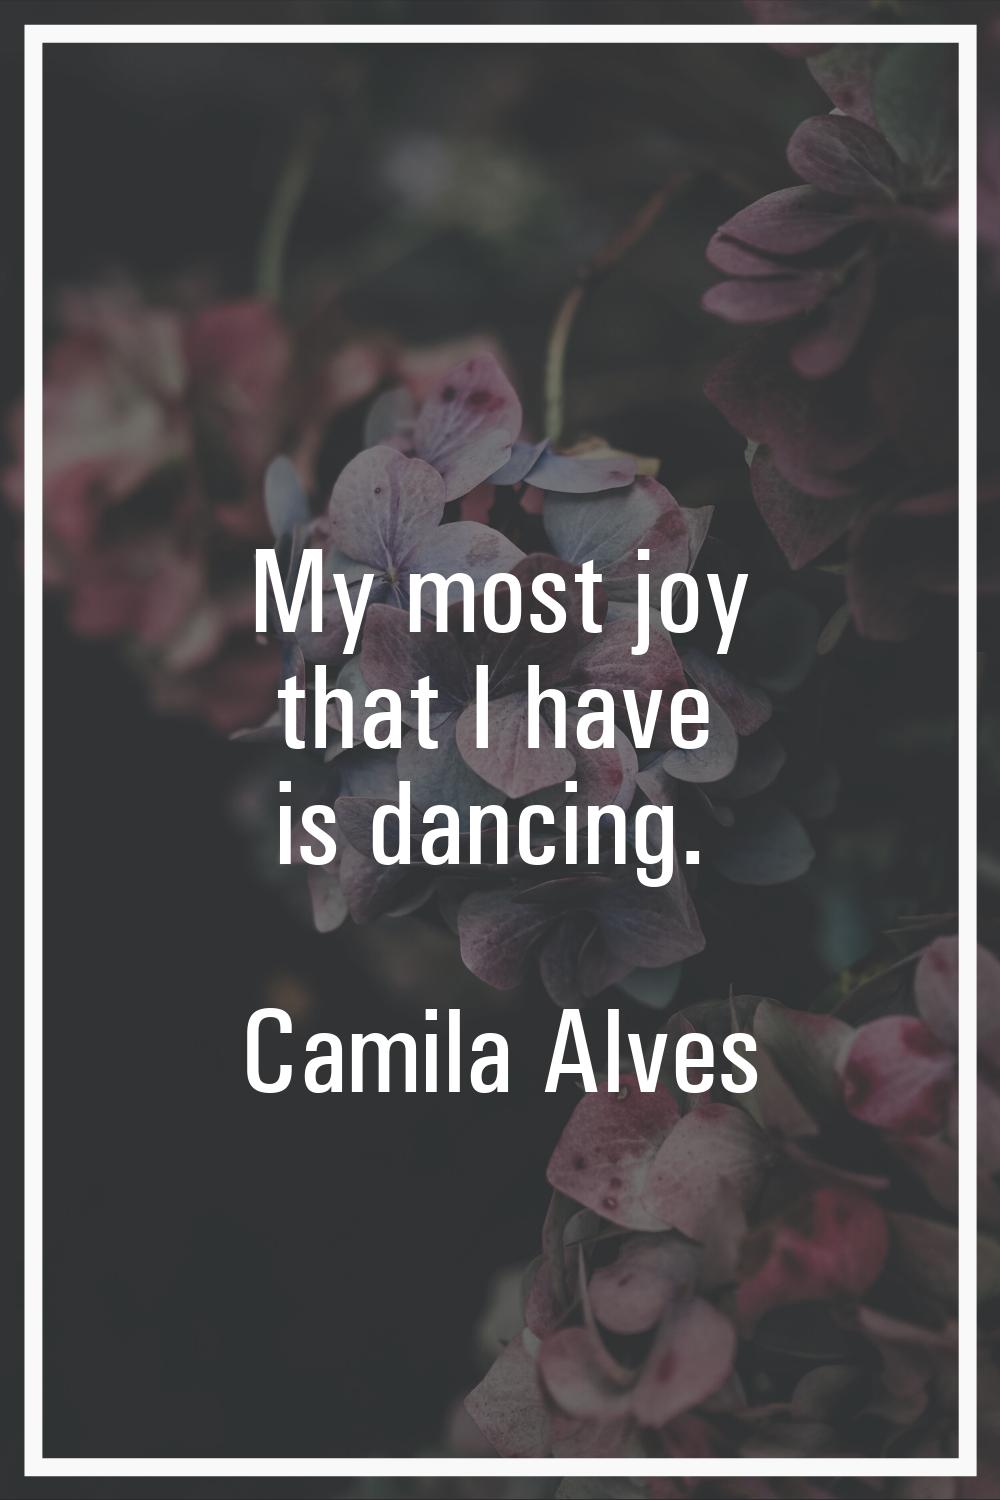 My most joy that I have is dancing.